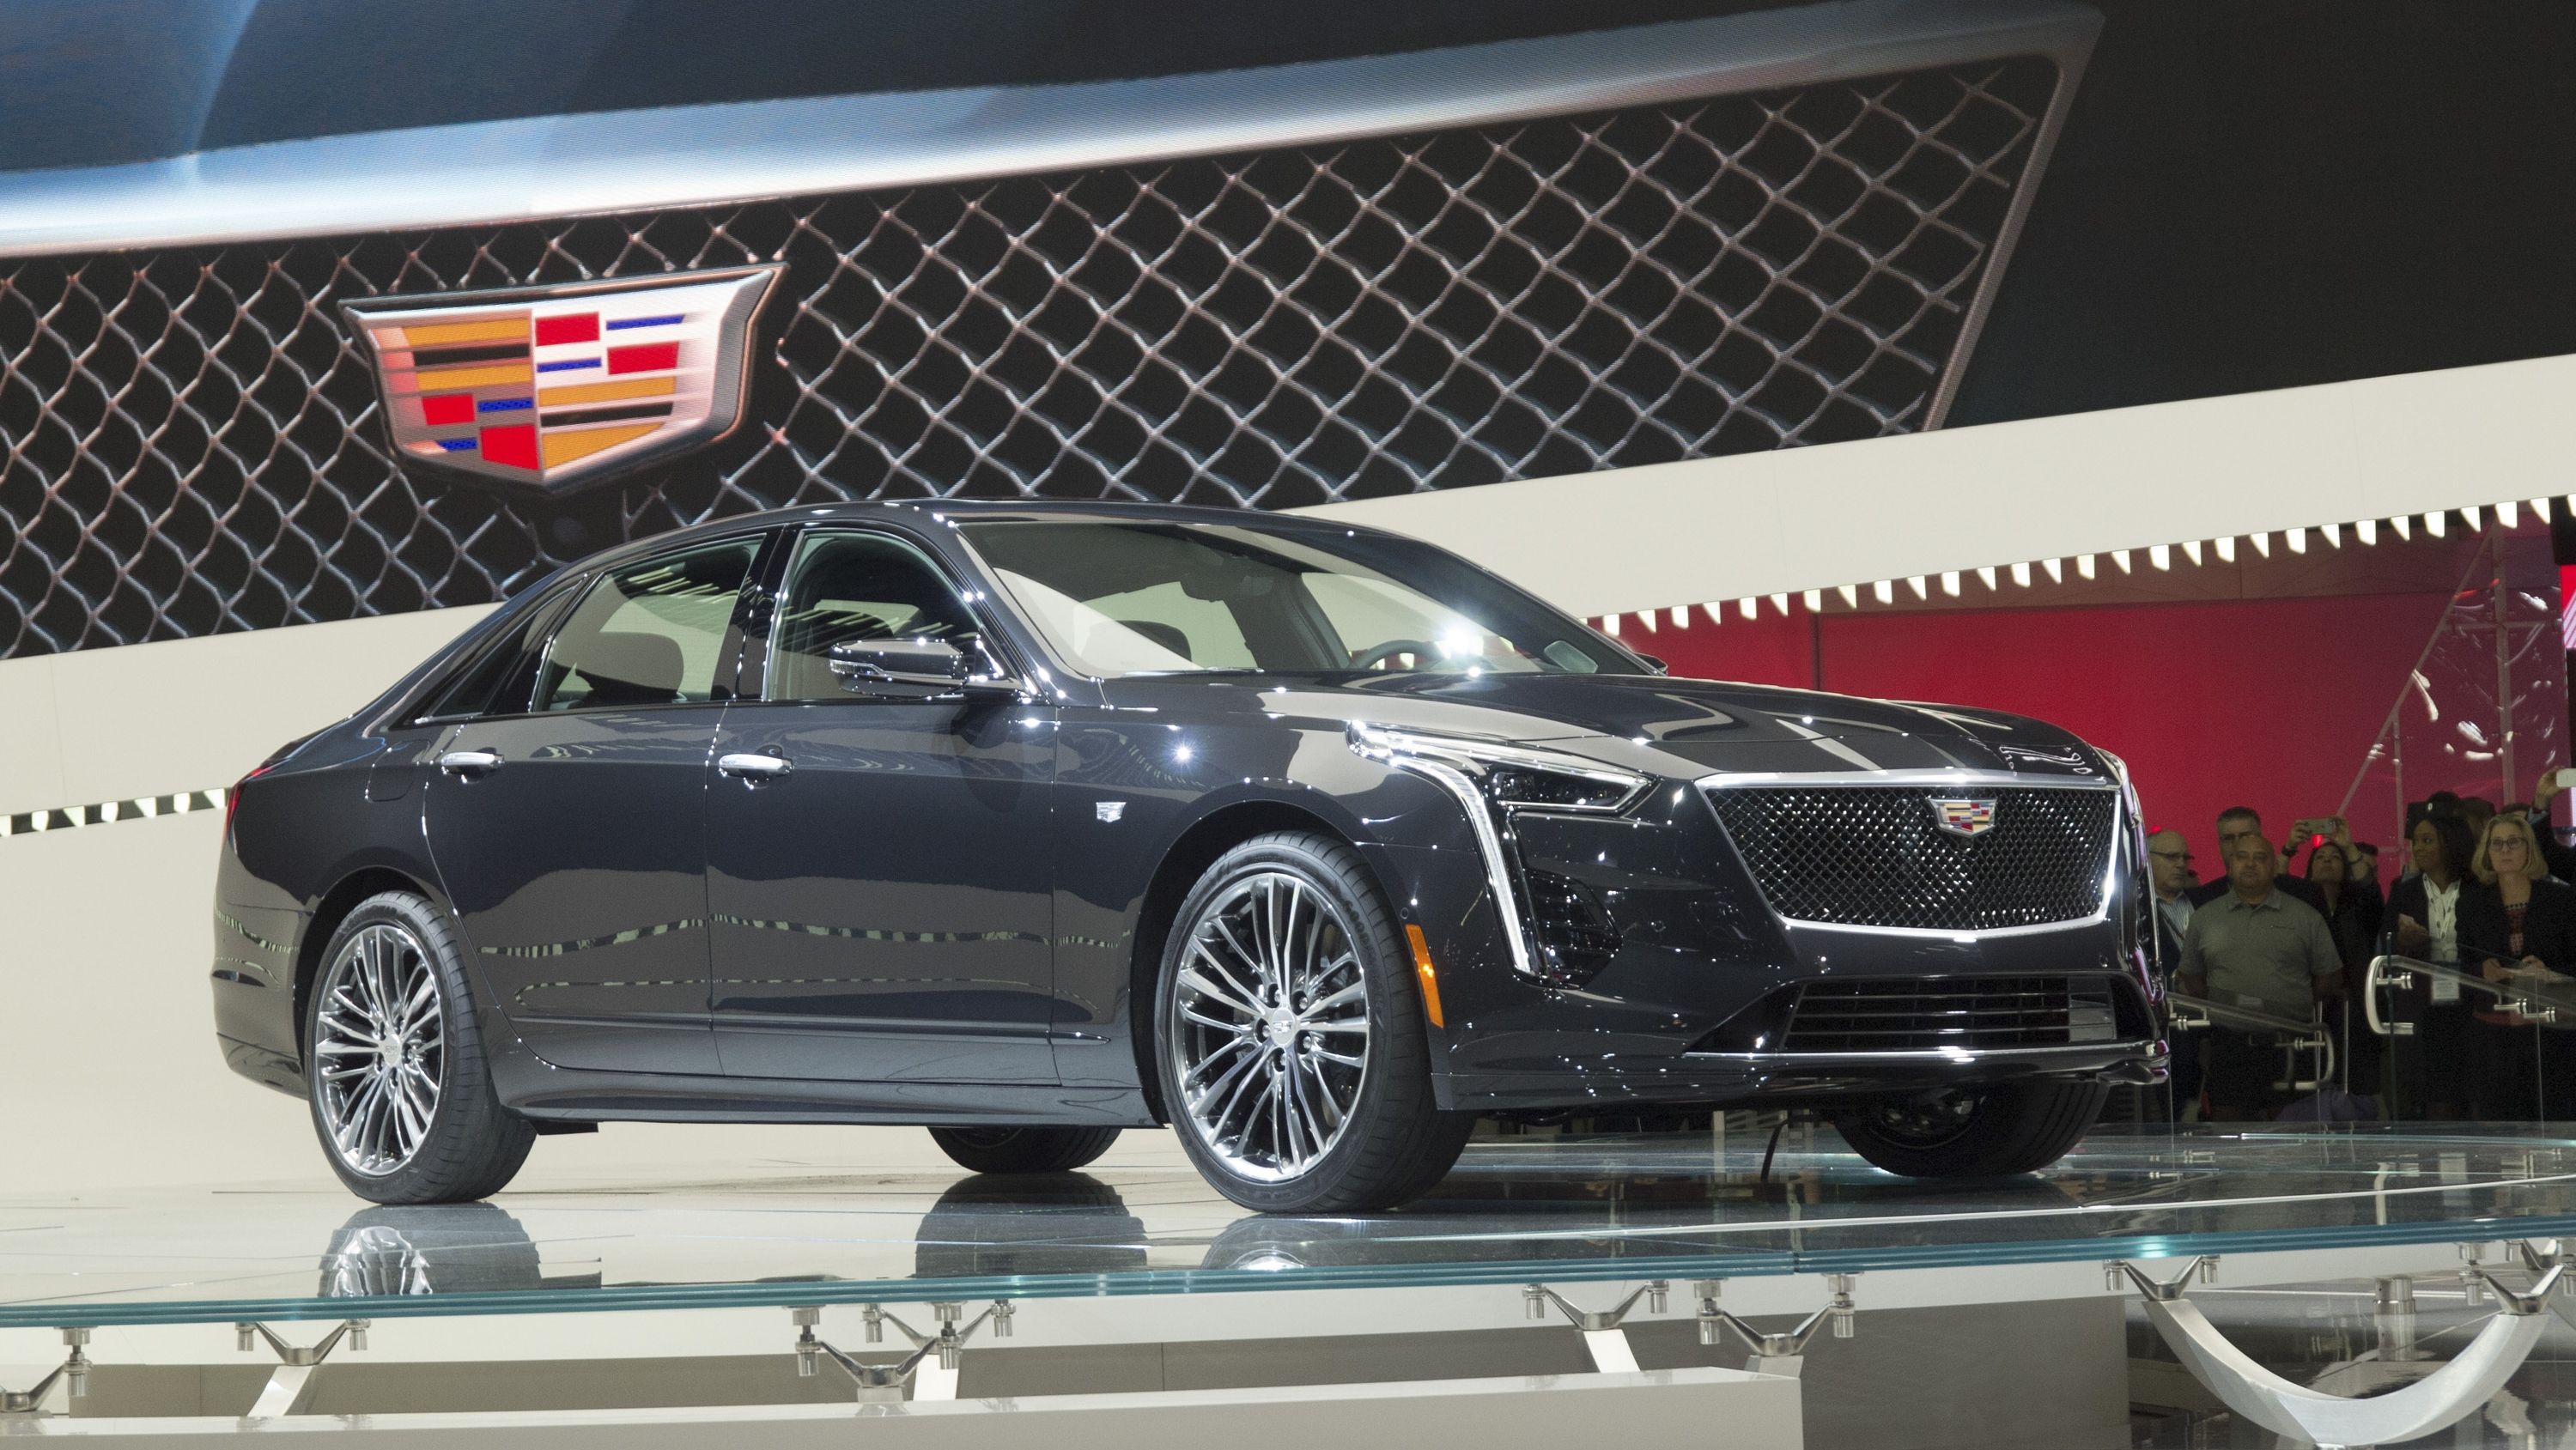 2016 - 2018 The Cadillac CT6 V-Sport Gives the Mercedes-AMG S65 Something to Worry About